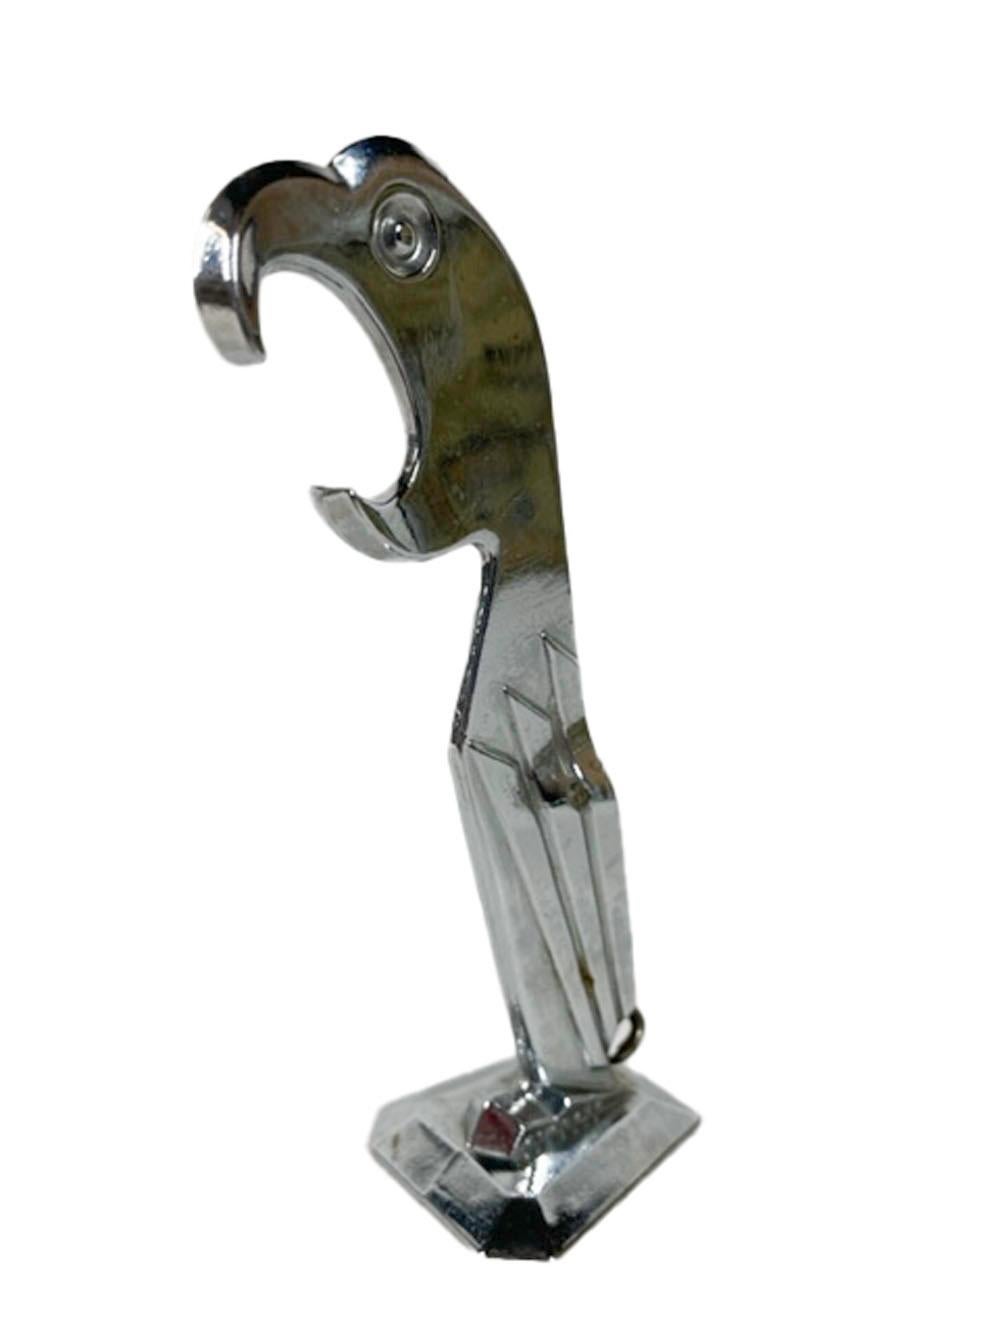 Art Deco stylized standing figure of a chrome plated parrot. Patented in 1929 its open mouth is a bottle opener while the corkscrew folds discretely into the back between the wings.